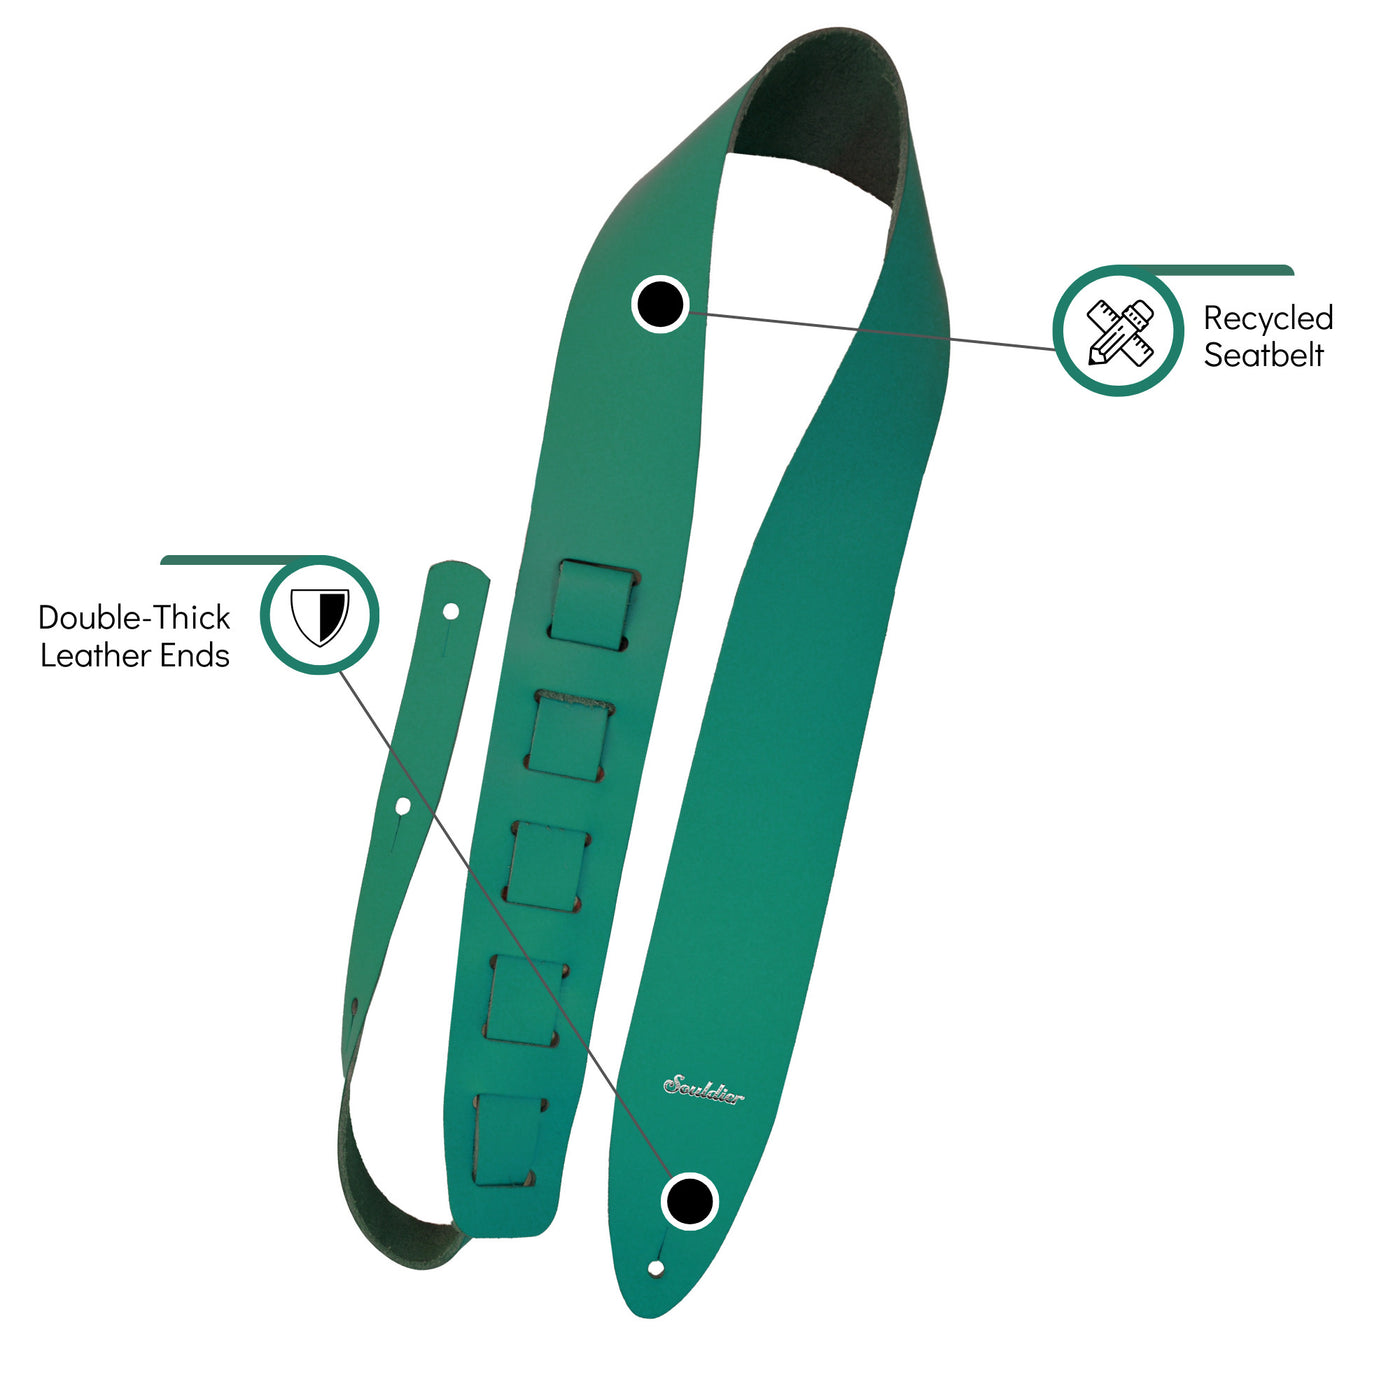 Souldier PSMGSTL - Handmade Prisma Guitar Strap for Bass, Electric or Acoustic Guitar, 2.5 Inches Wide and Adjustable Length from 43" to 57" Made in the USA, Teal